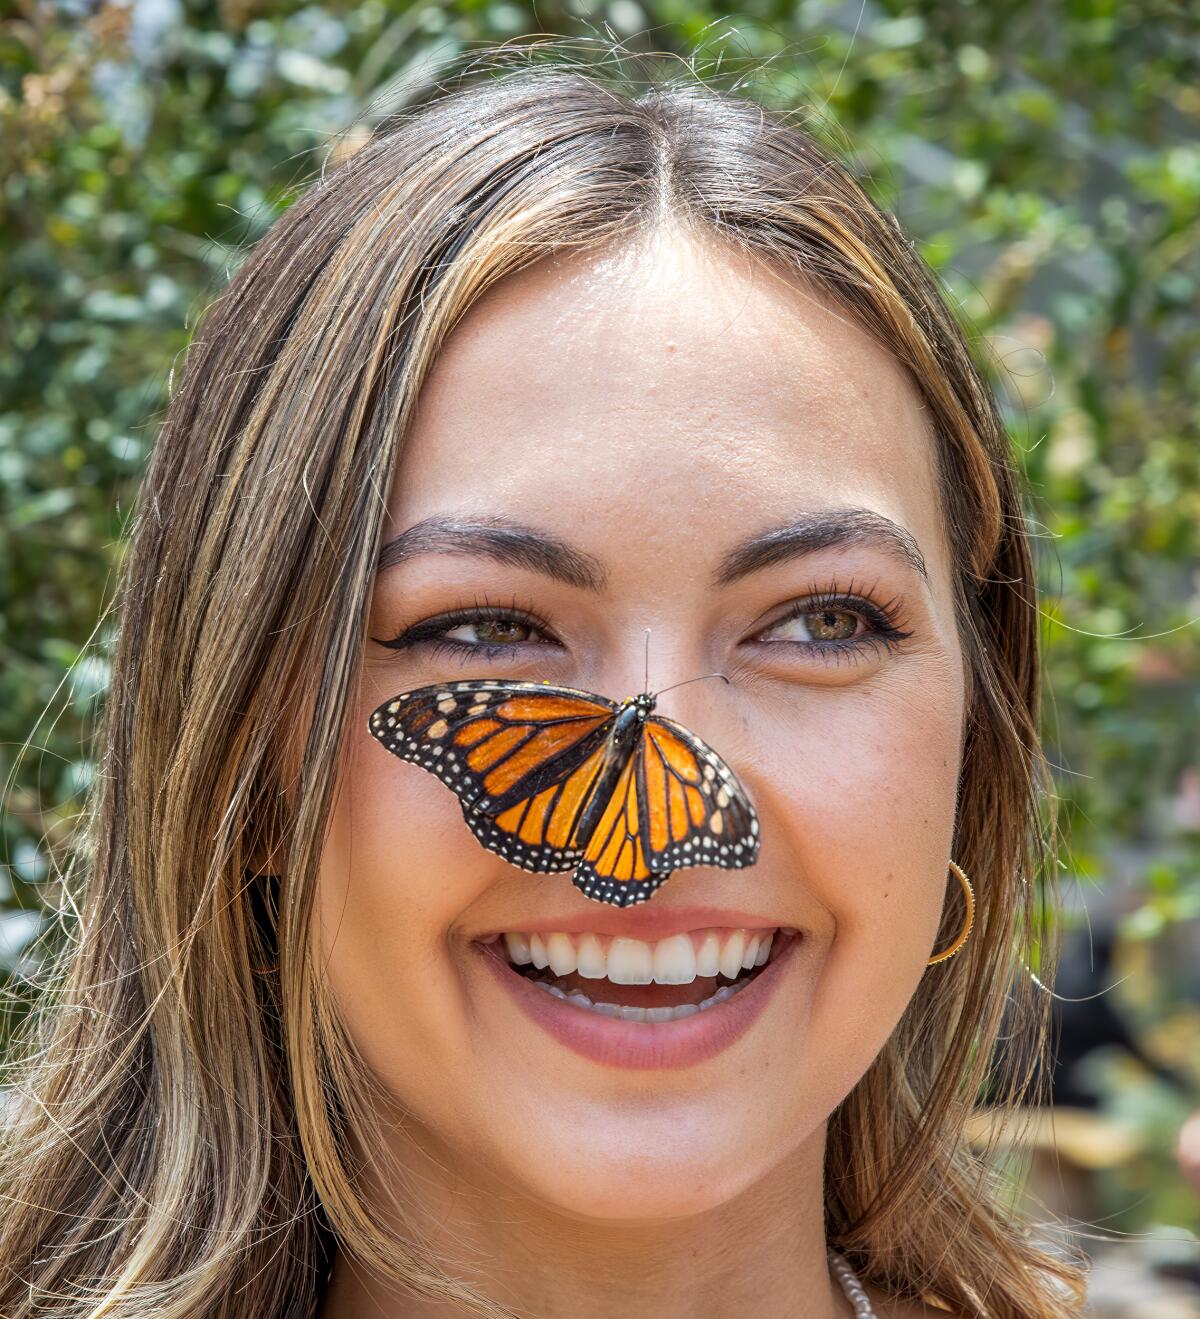 A monarch butterfly lands on Maylie Schreck's nose during her visit to Butterfly Farms in Encinitas.